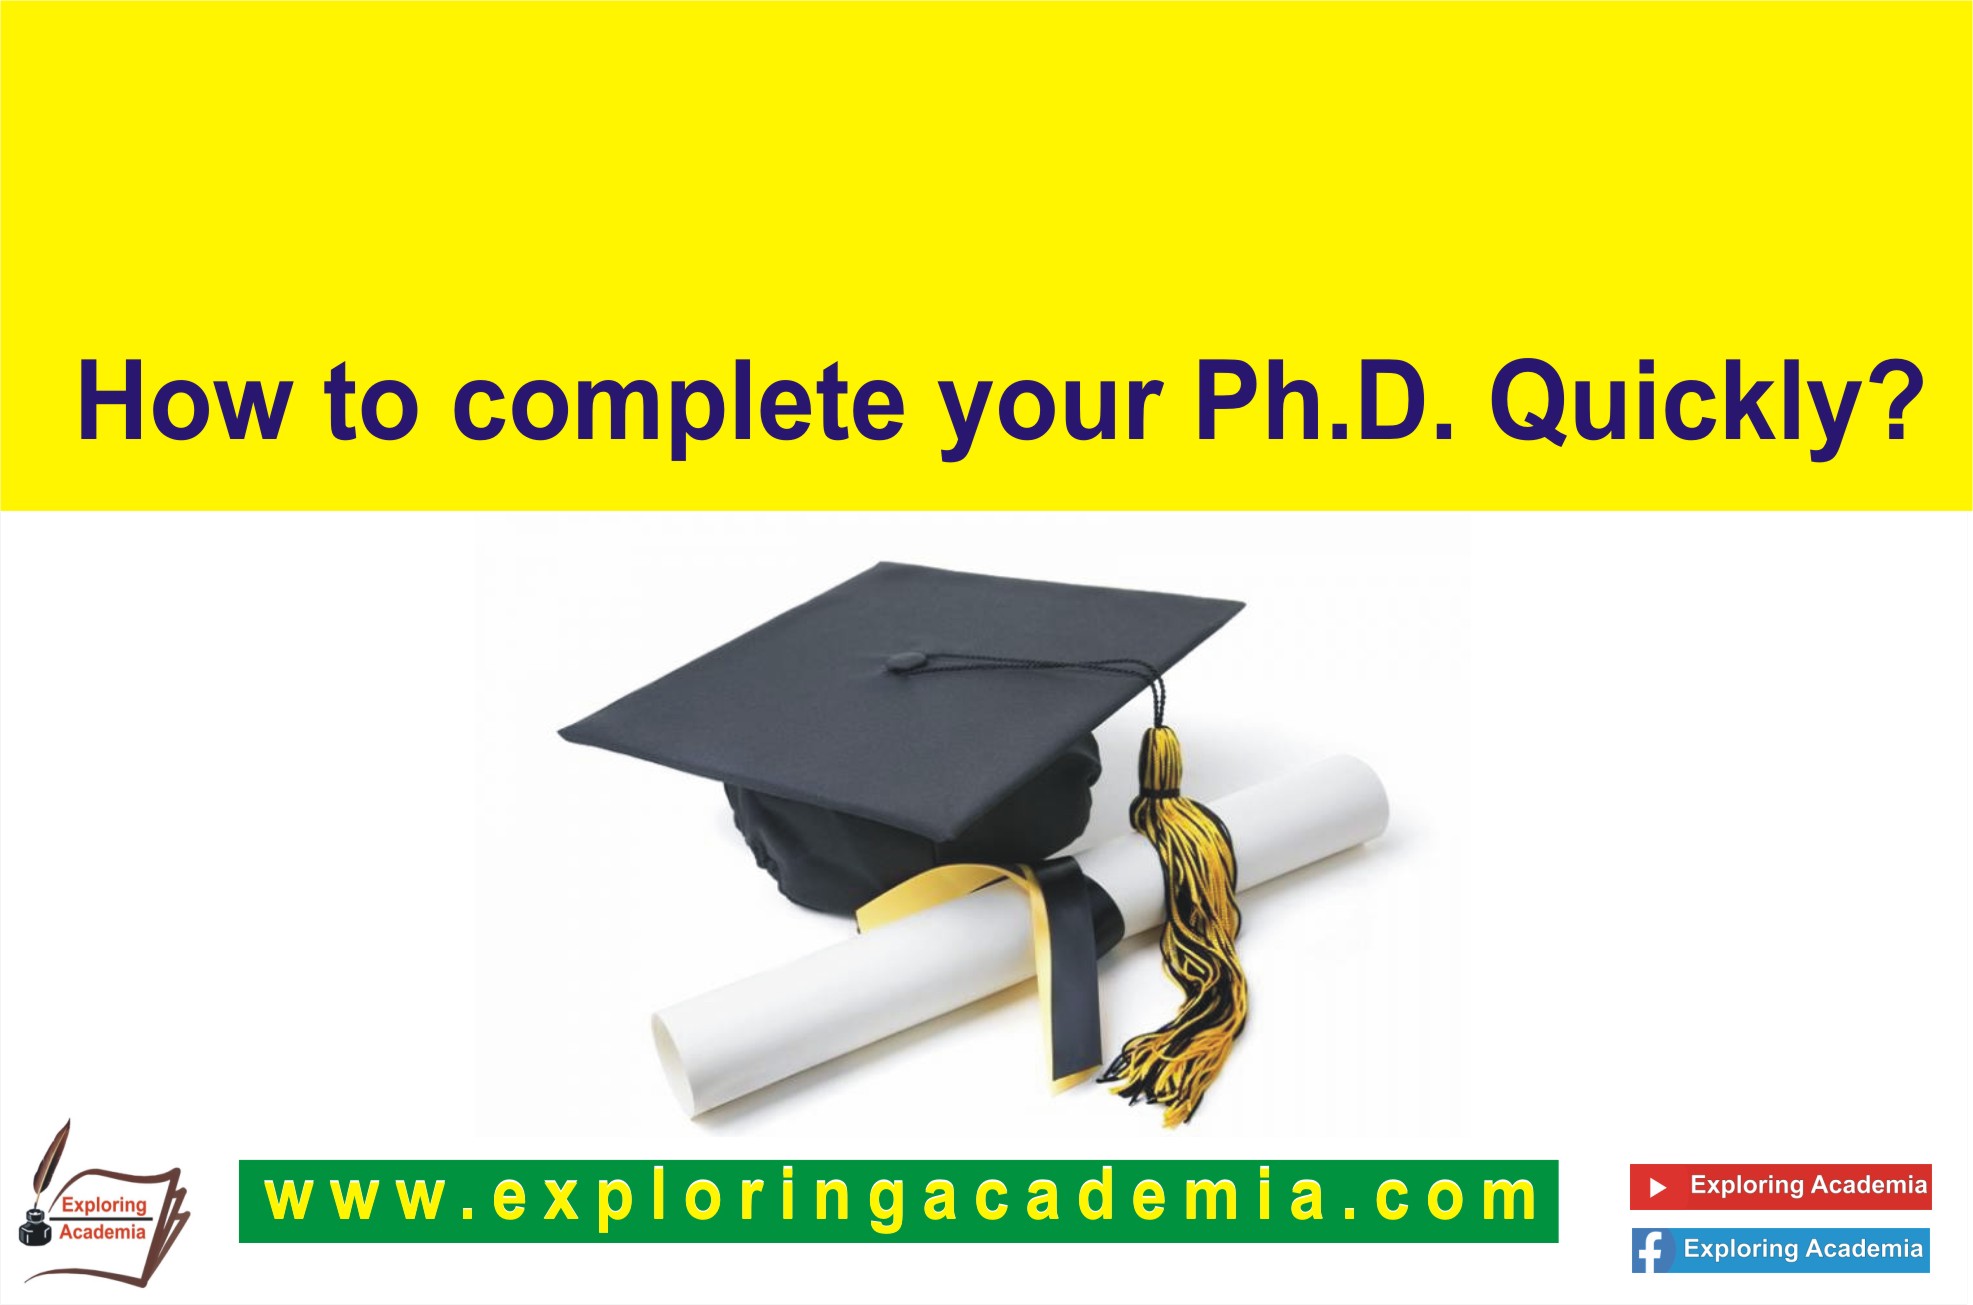 How to complete your Ph.D. quickly?